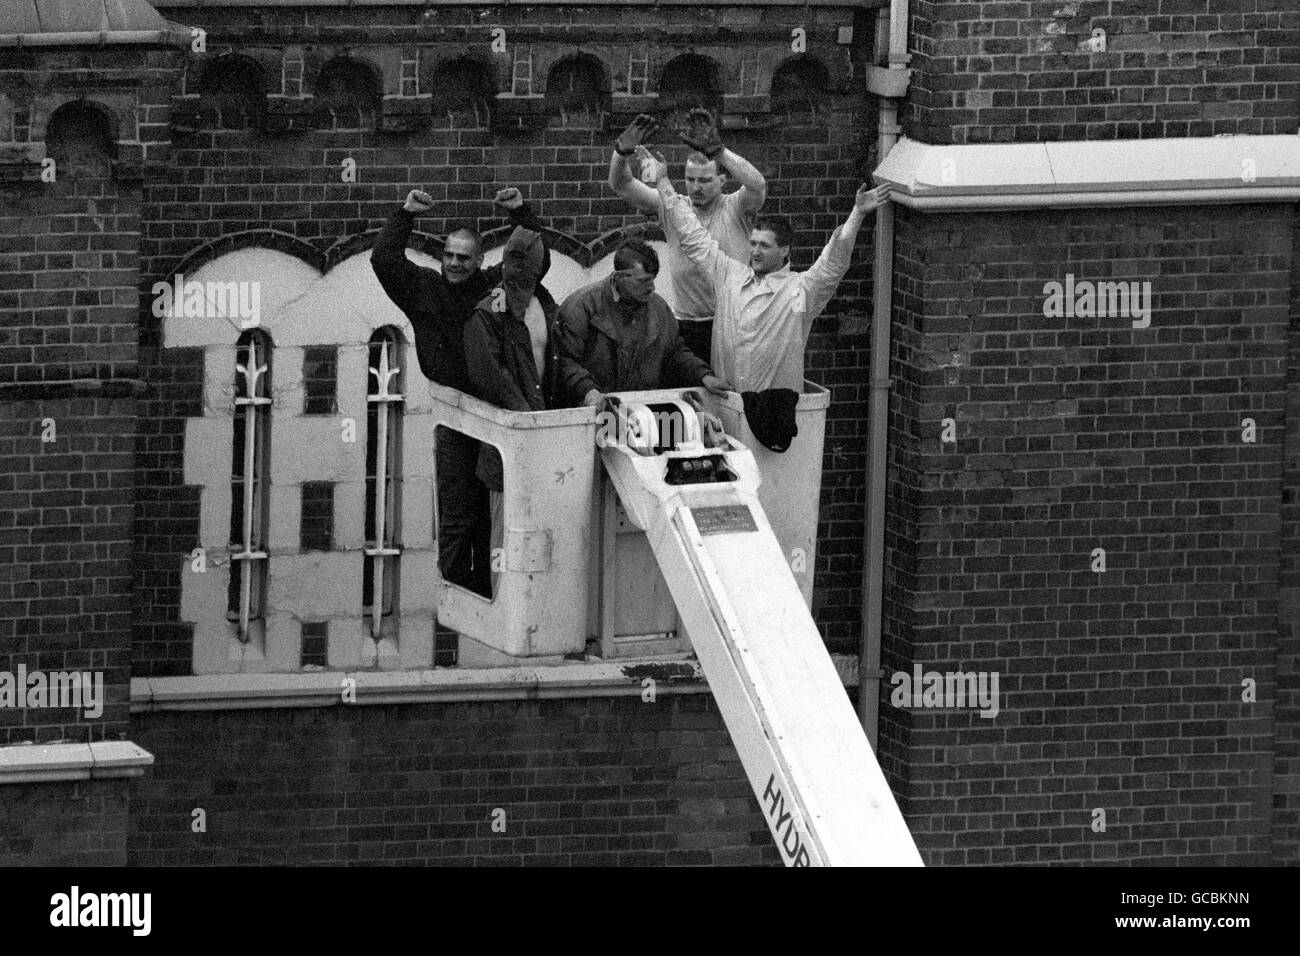 Ringleader Paul Taylor (second right) comes down with the remaining rioters as the siege at Strangeways ends. Stock Photo